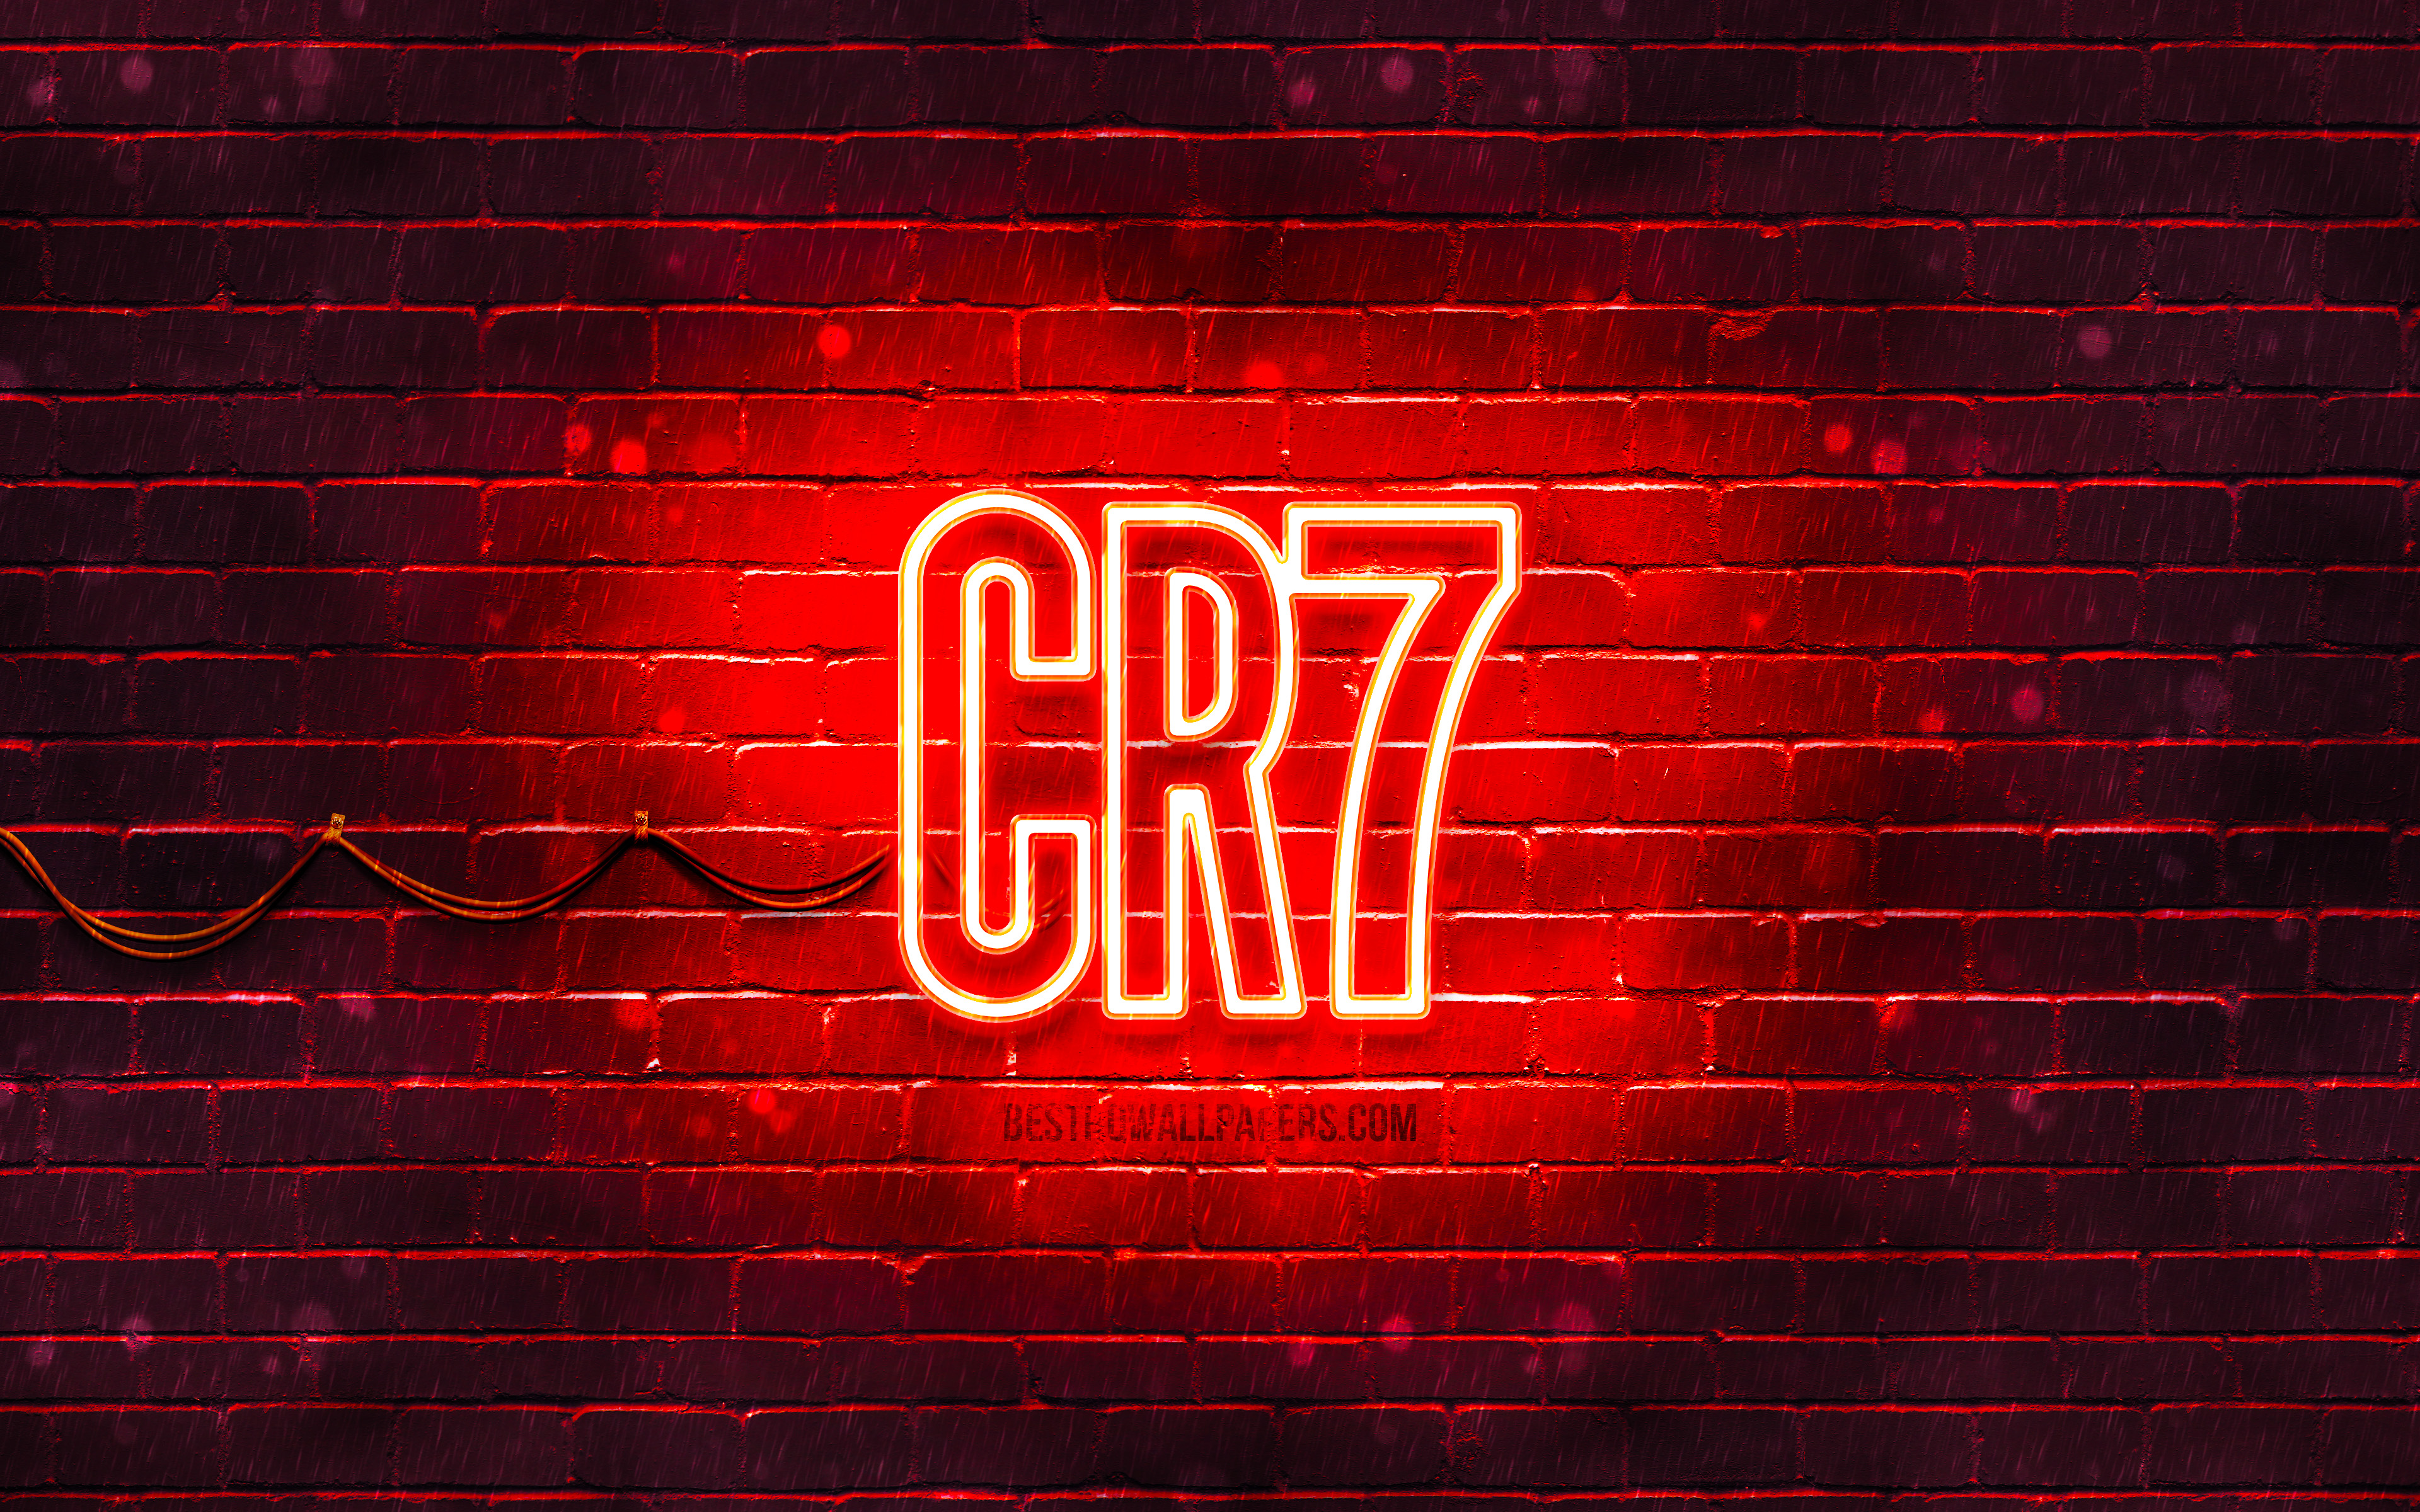 Download wallpaper CR7 red logo, 4k, red brickwall, Cristiano Ronaldo, fan art, CR7 logo, football stars, CR7 neon logo, CR Cristiano Ronaldo logo for desktop with resolution 3840x2400. High Quality HD picture